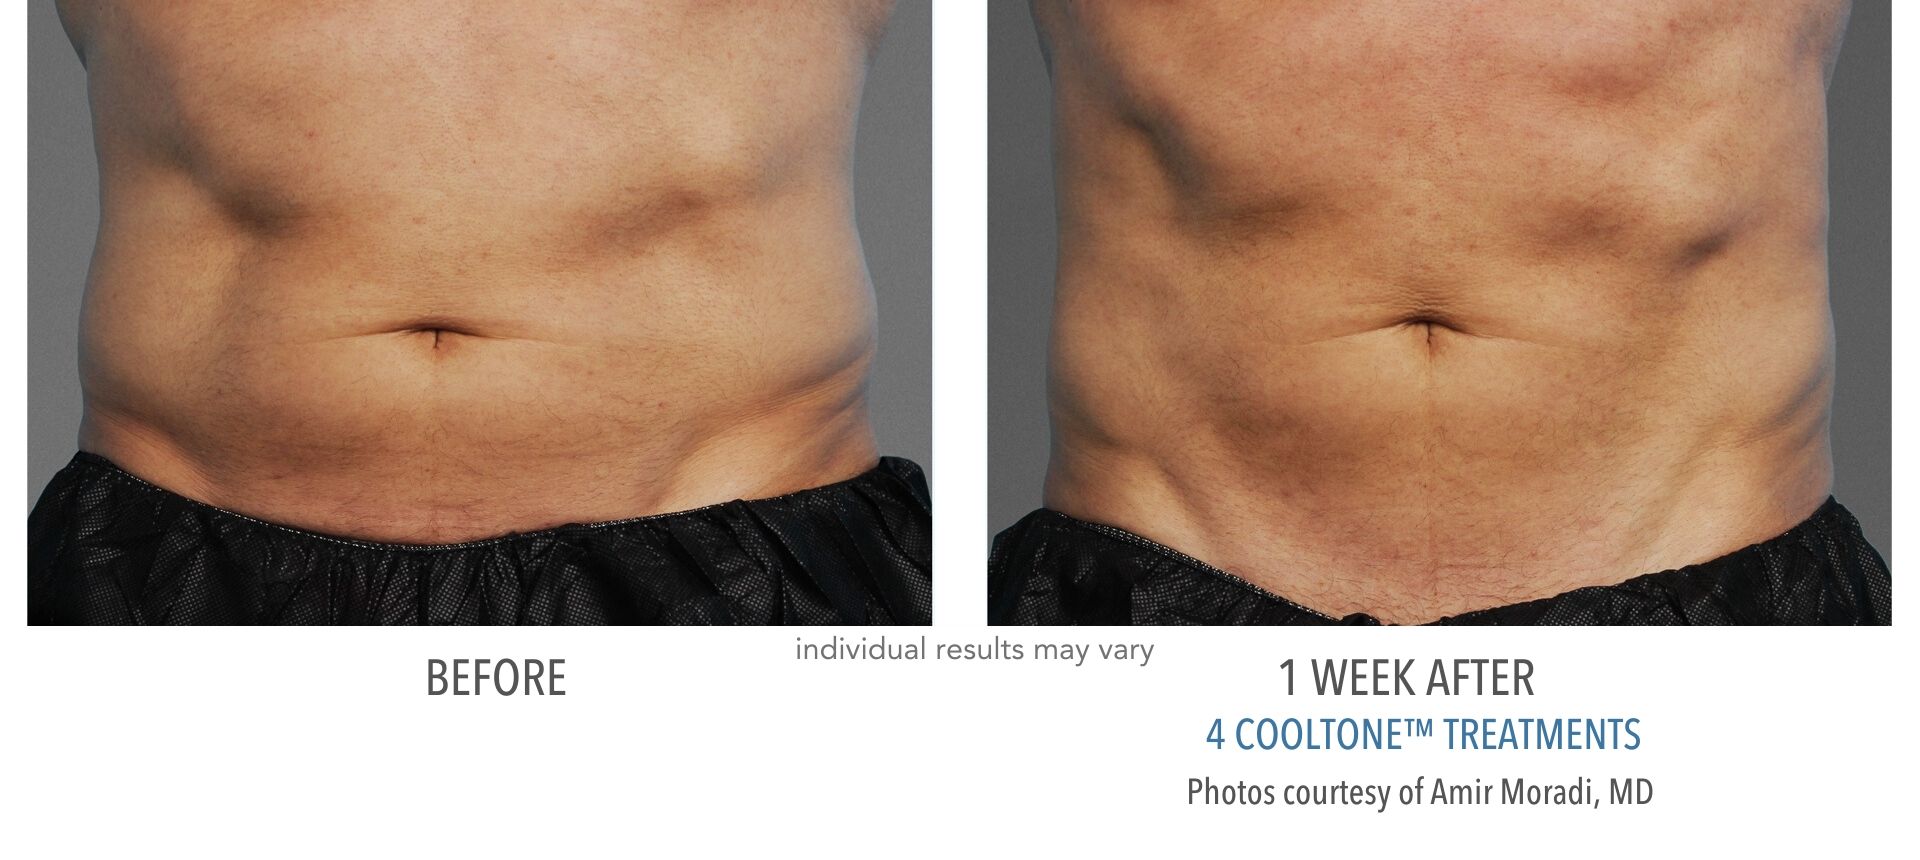 Cooltone results for male abdomen before and after at Laser + Skin Institute in Chatham, New Jersey.